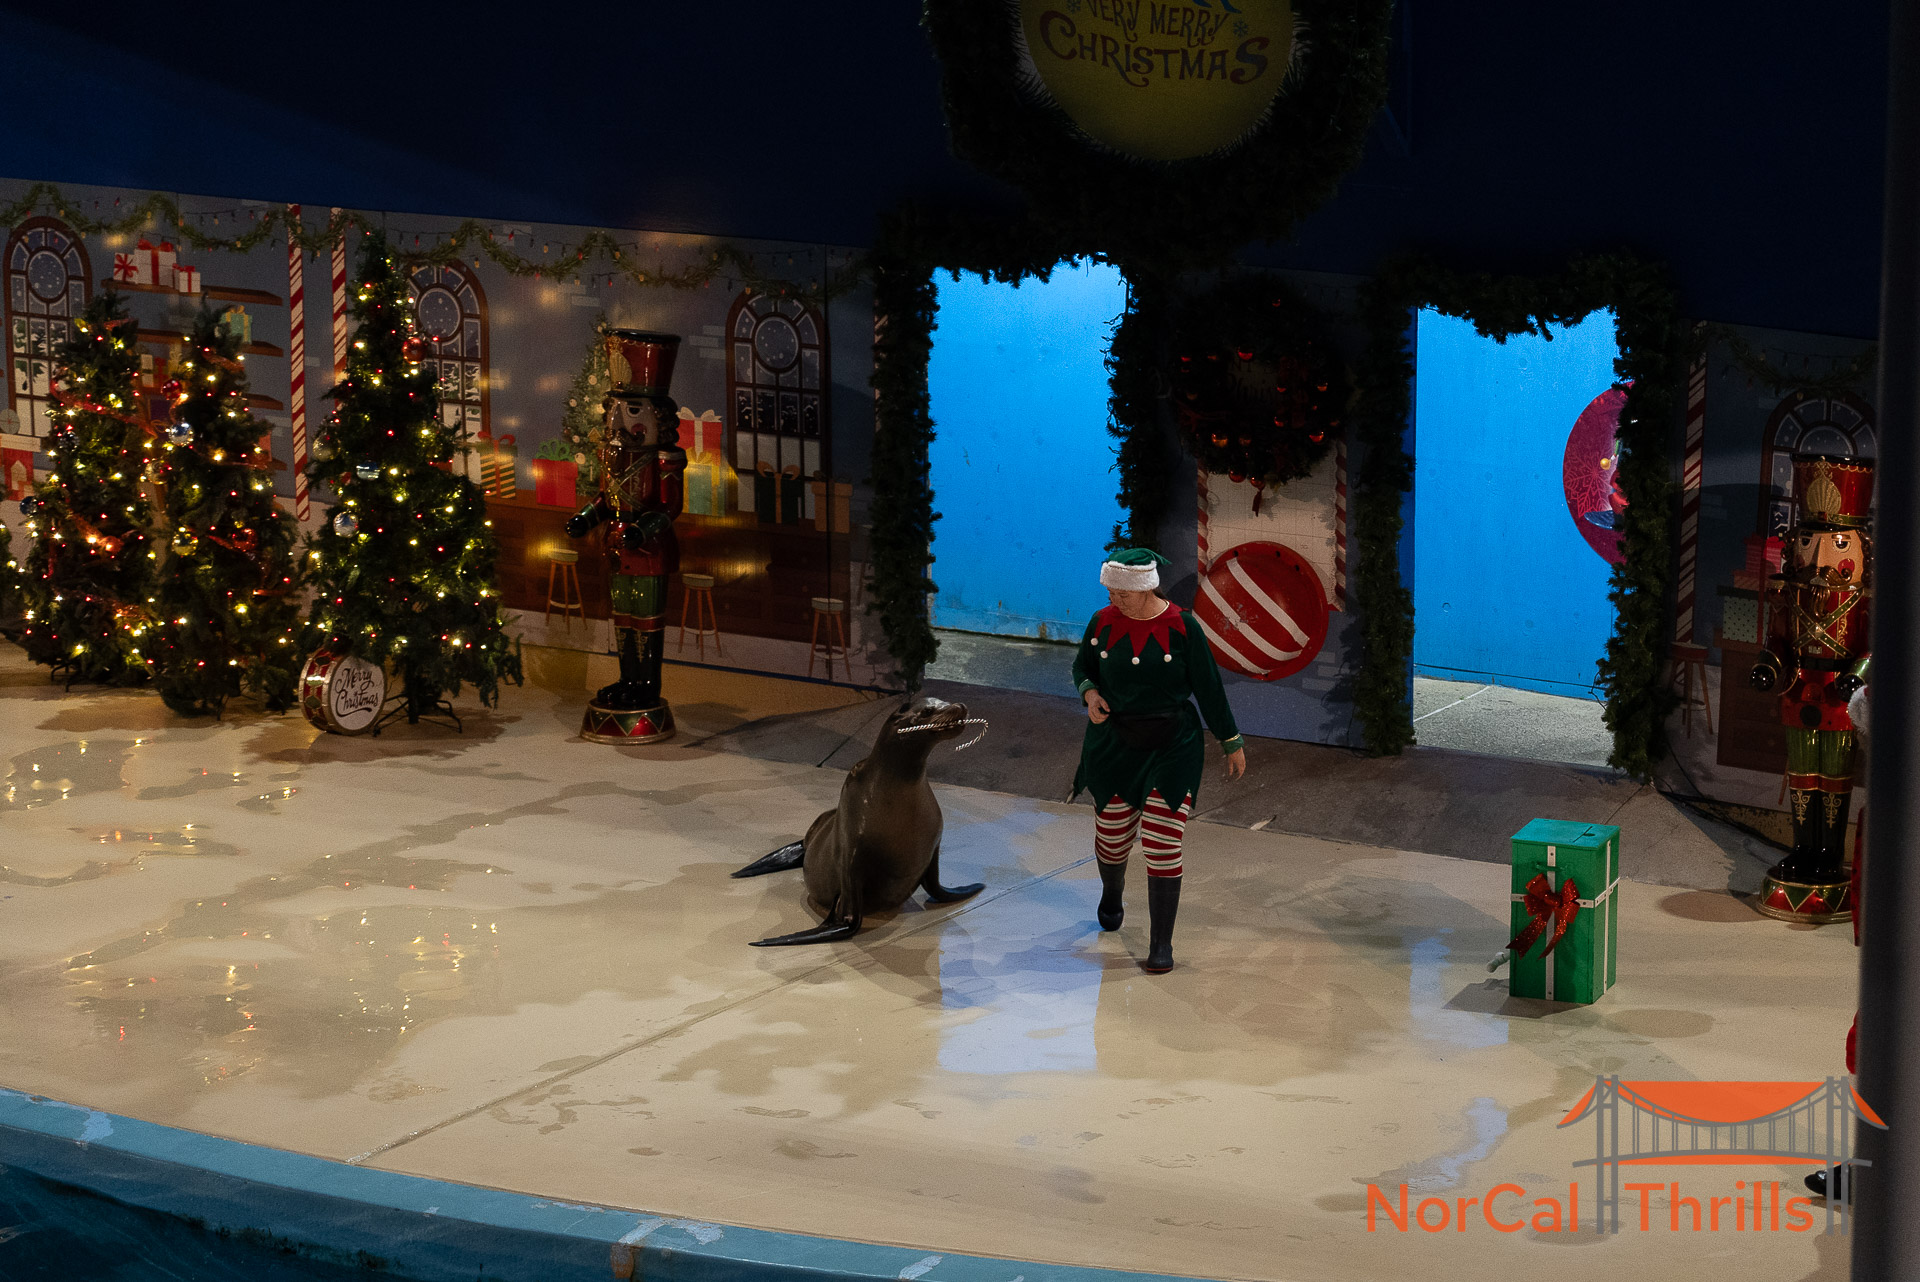 Holiday in the Park | Animal Shows